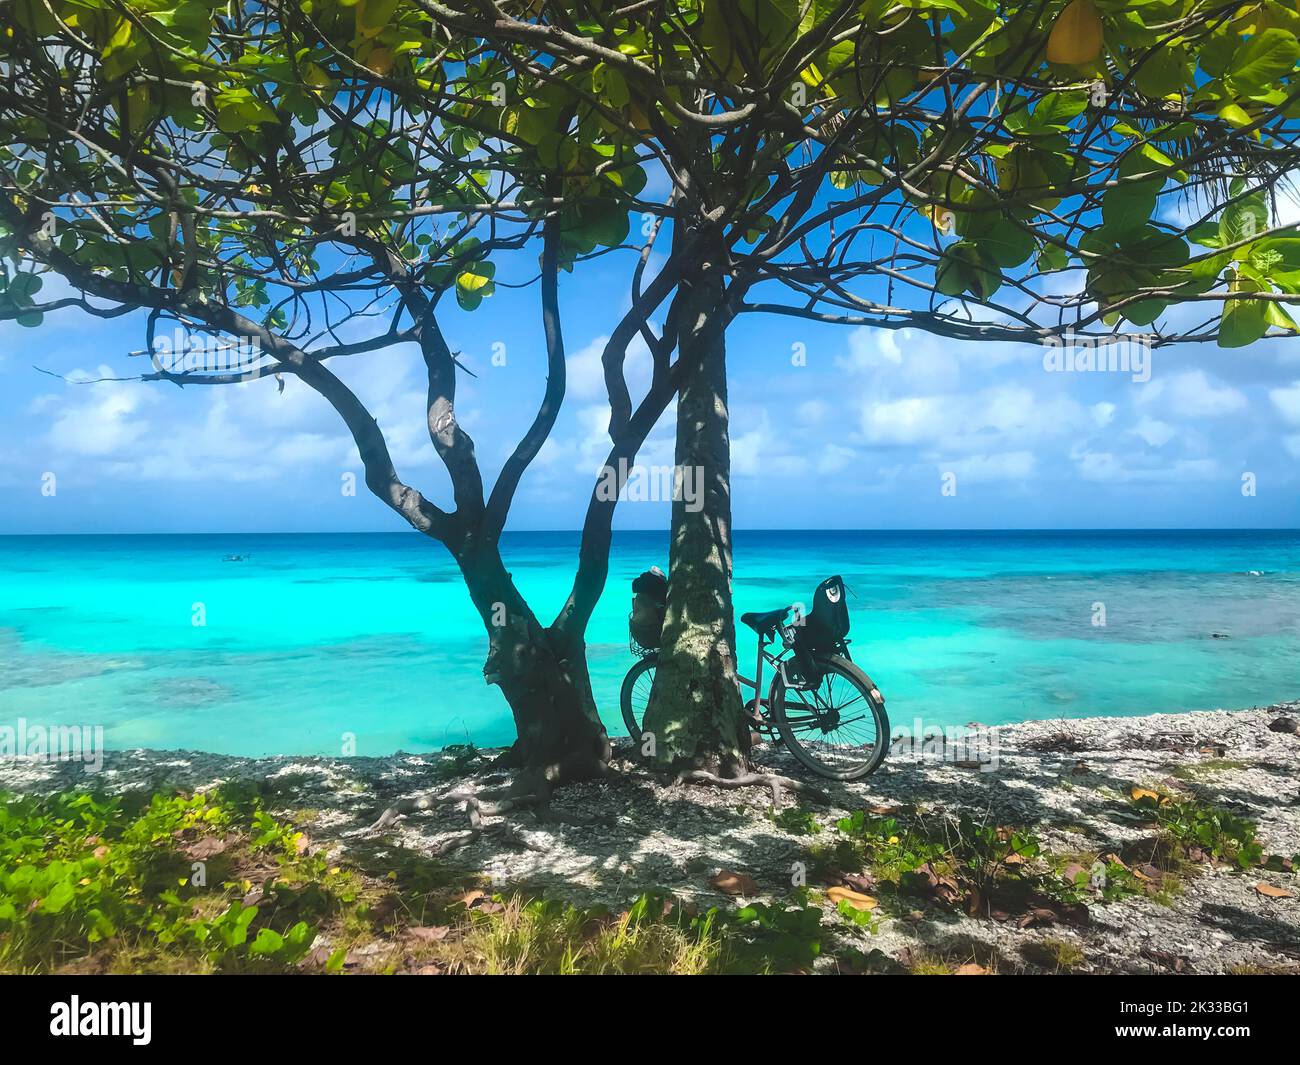 Bicycle on the beach under the tree. Turquoise water, bright blue sky in sunny day. Ideal resting place. Amazing natural summer scenery. Travel, tourism, vacation, freedom and active lifestyle concept Stock Photo